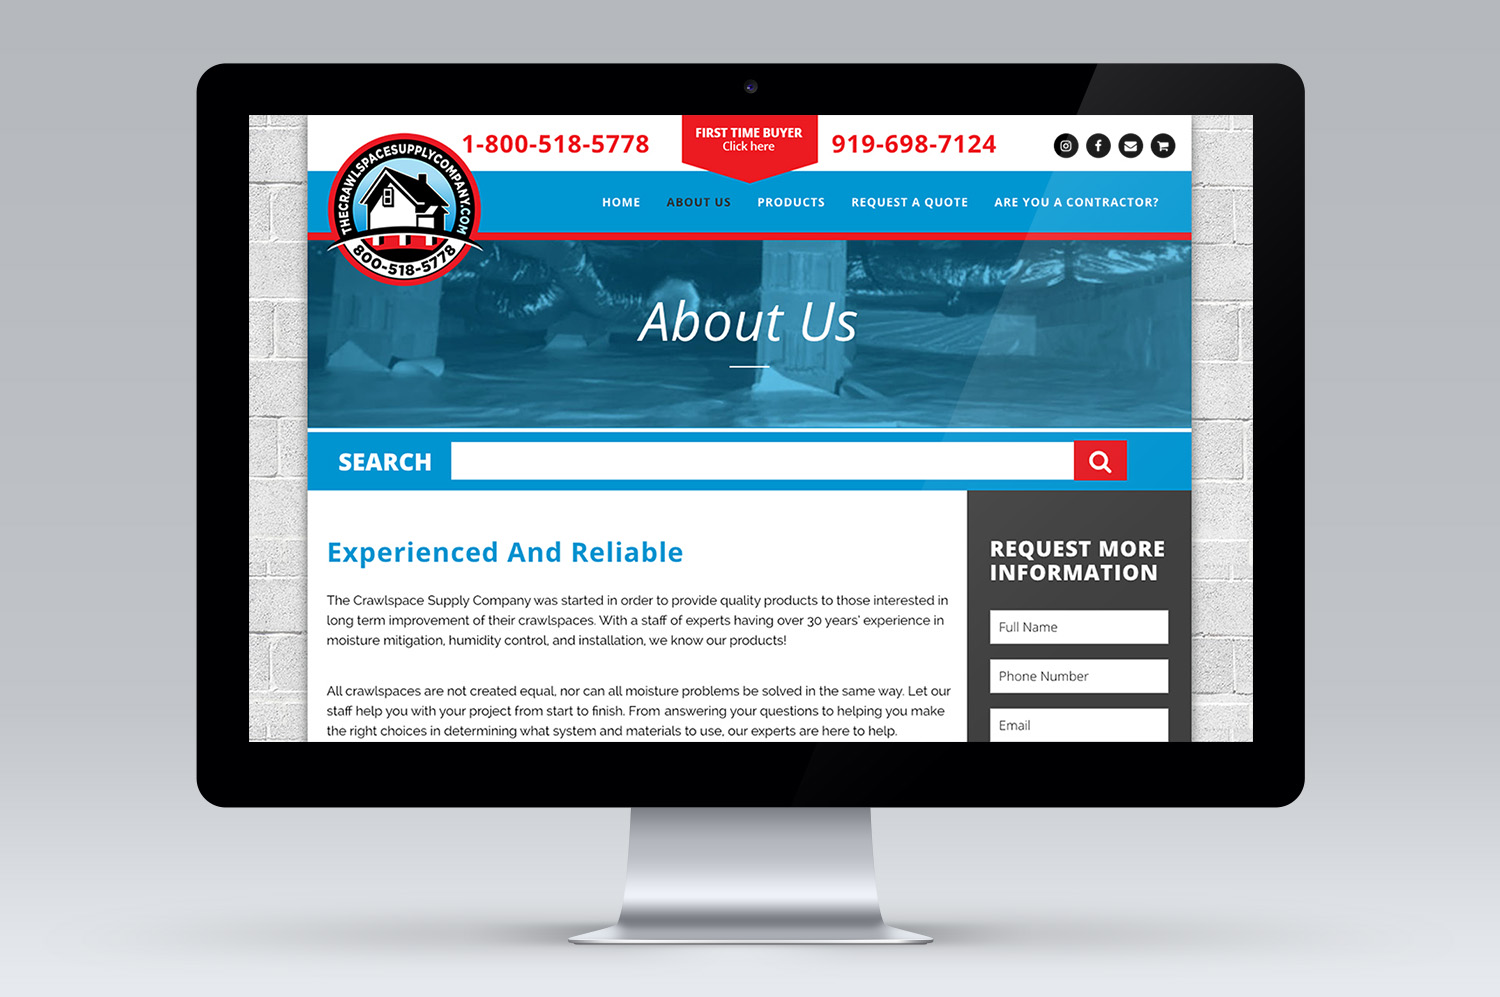 Web Design Crawl Space Raleigh Nc Crawl Space Supply Company About Us